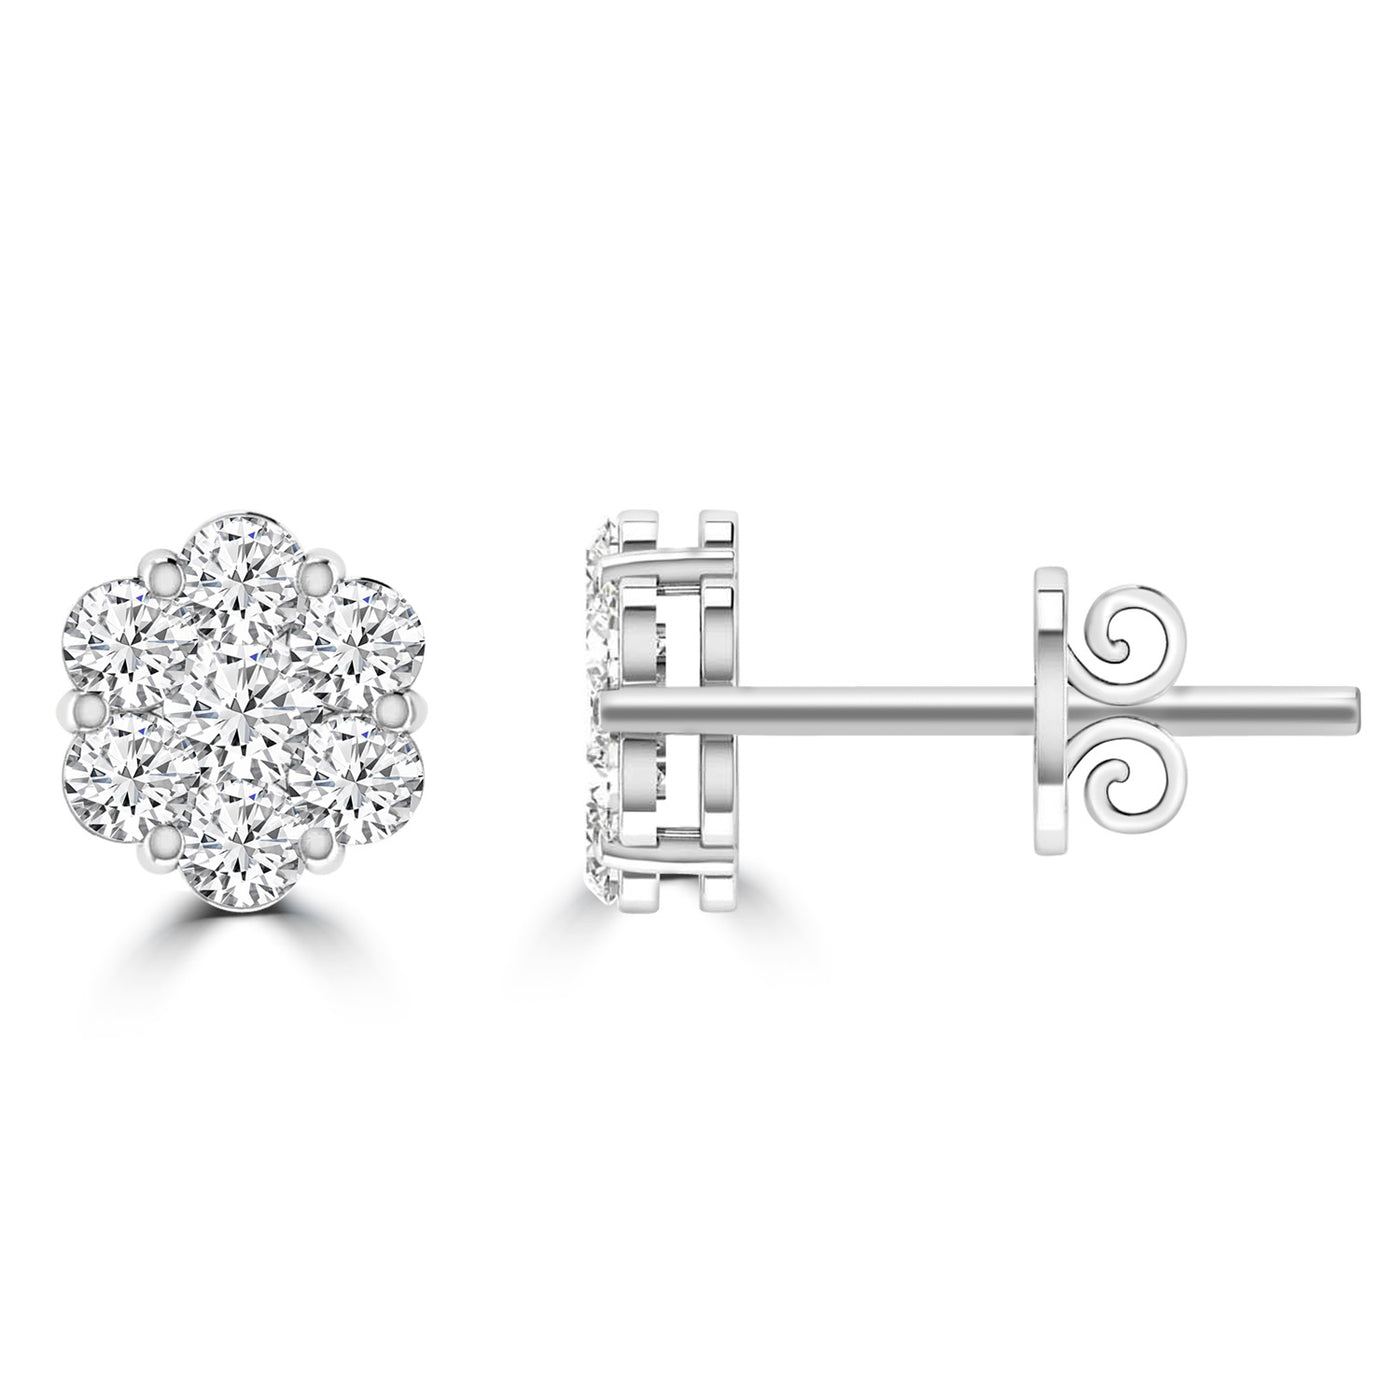 9ct white gold and diamond earrings